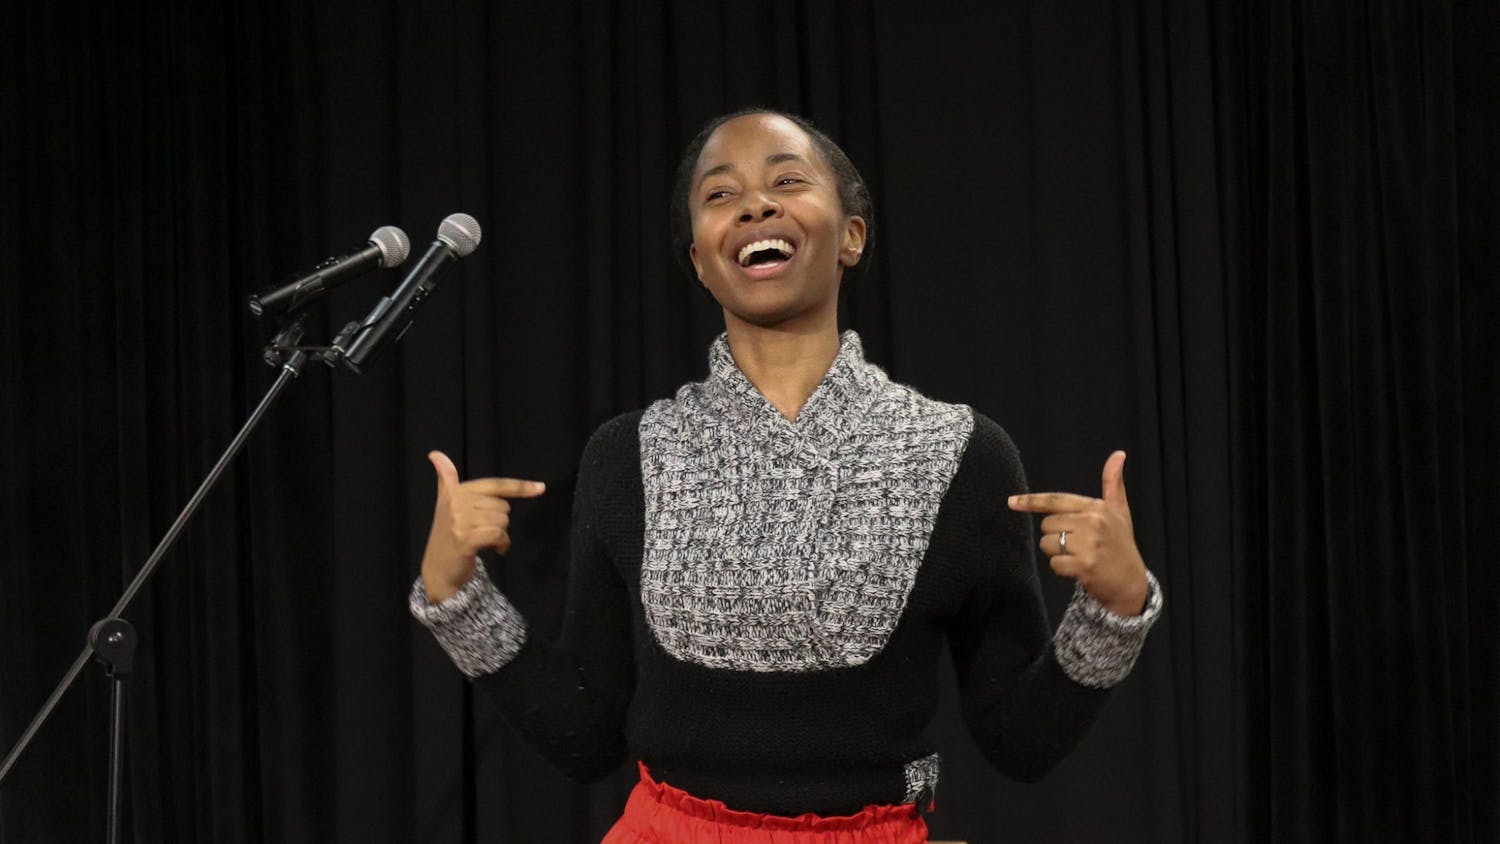 Traci Neal, a USC alumni and NY Times published writer delivers some slam poetry during the UniVerse Popcorn &amp; Poetry event on Jan. 26, 2022. First Lady Patricia Harris-Pastides, creator of UniVERSE, was in attendance during the event.